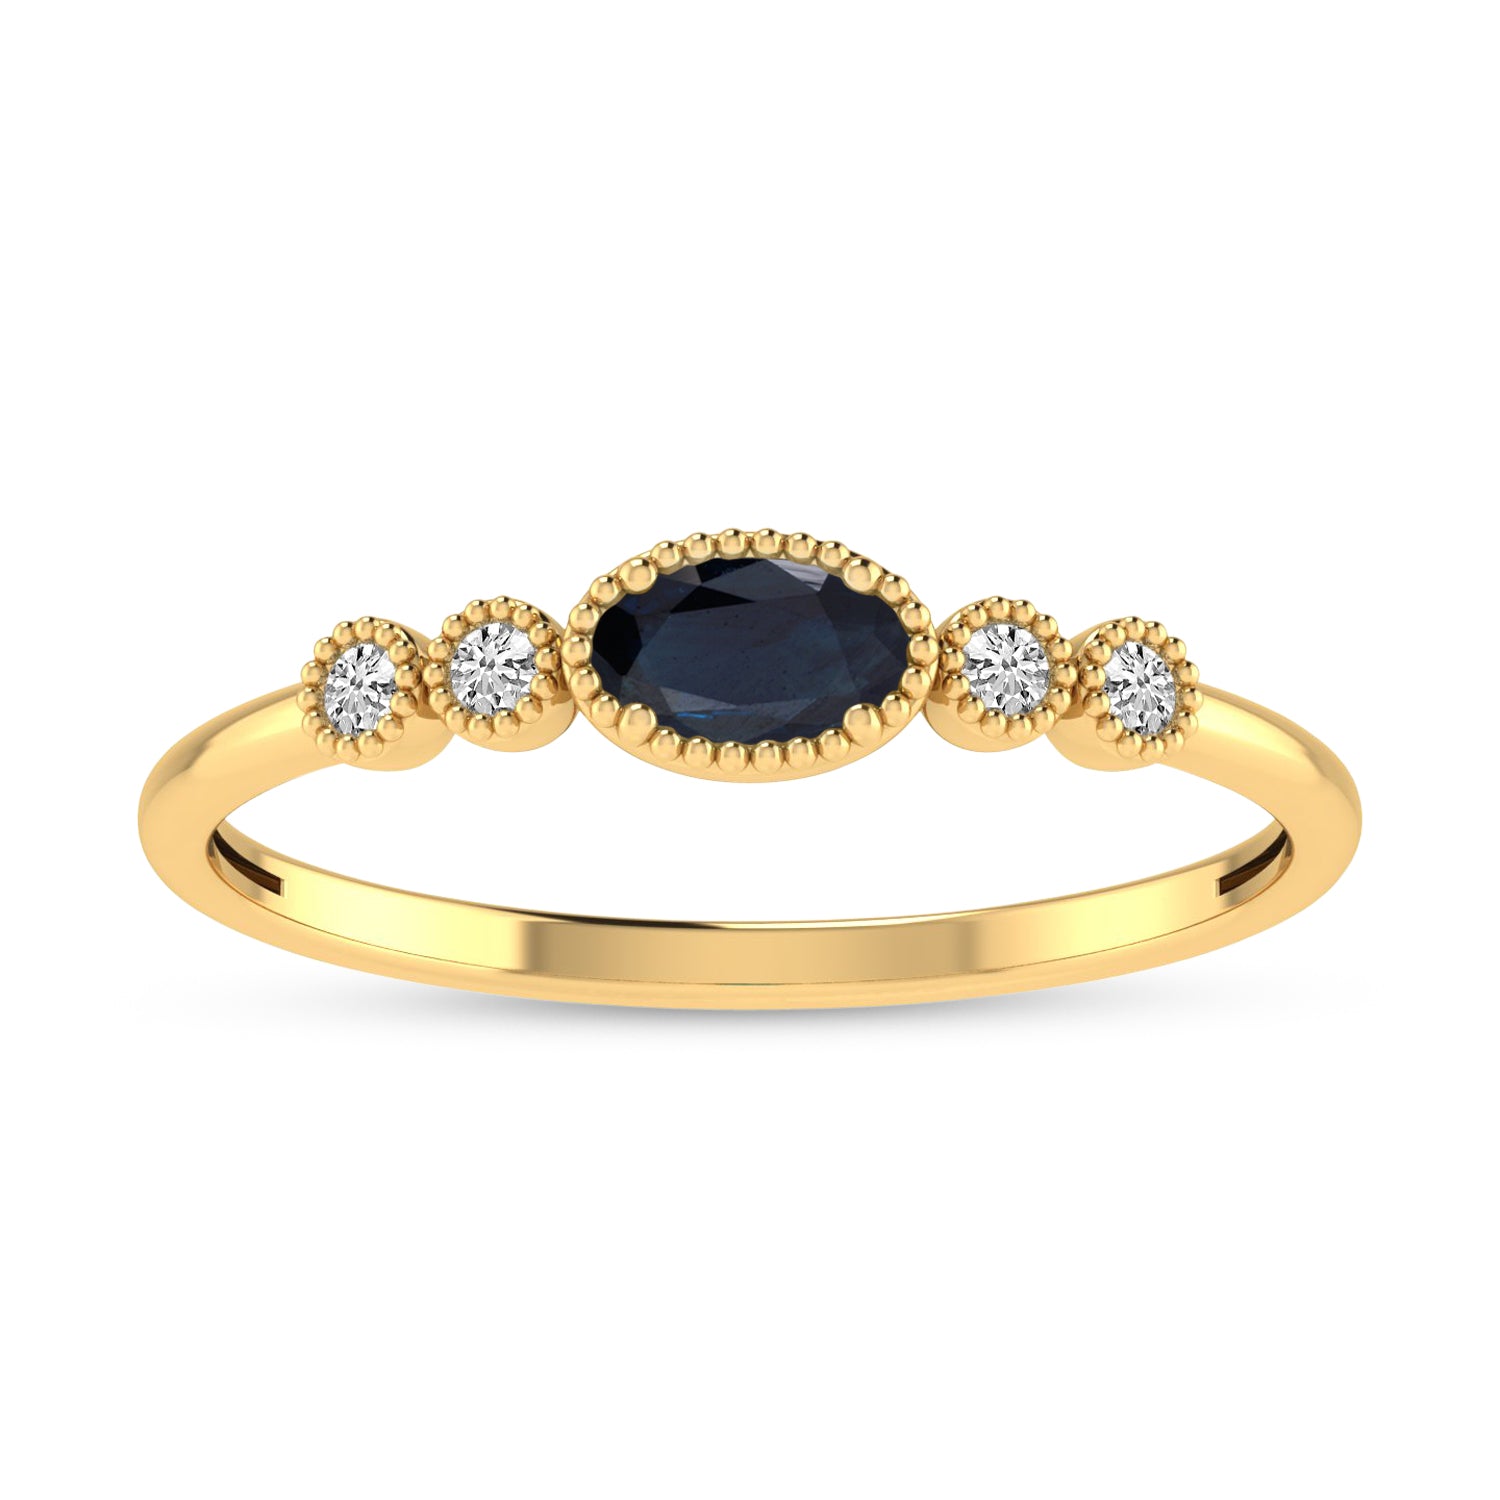 10K Yellow Gold Oval Sapphire and Diamond Stackable Ring RM4307-SEPT